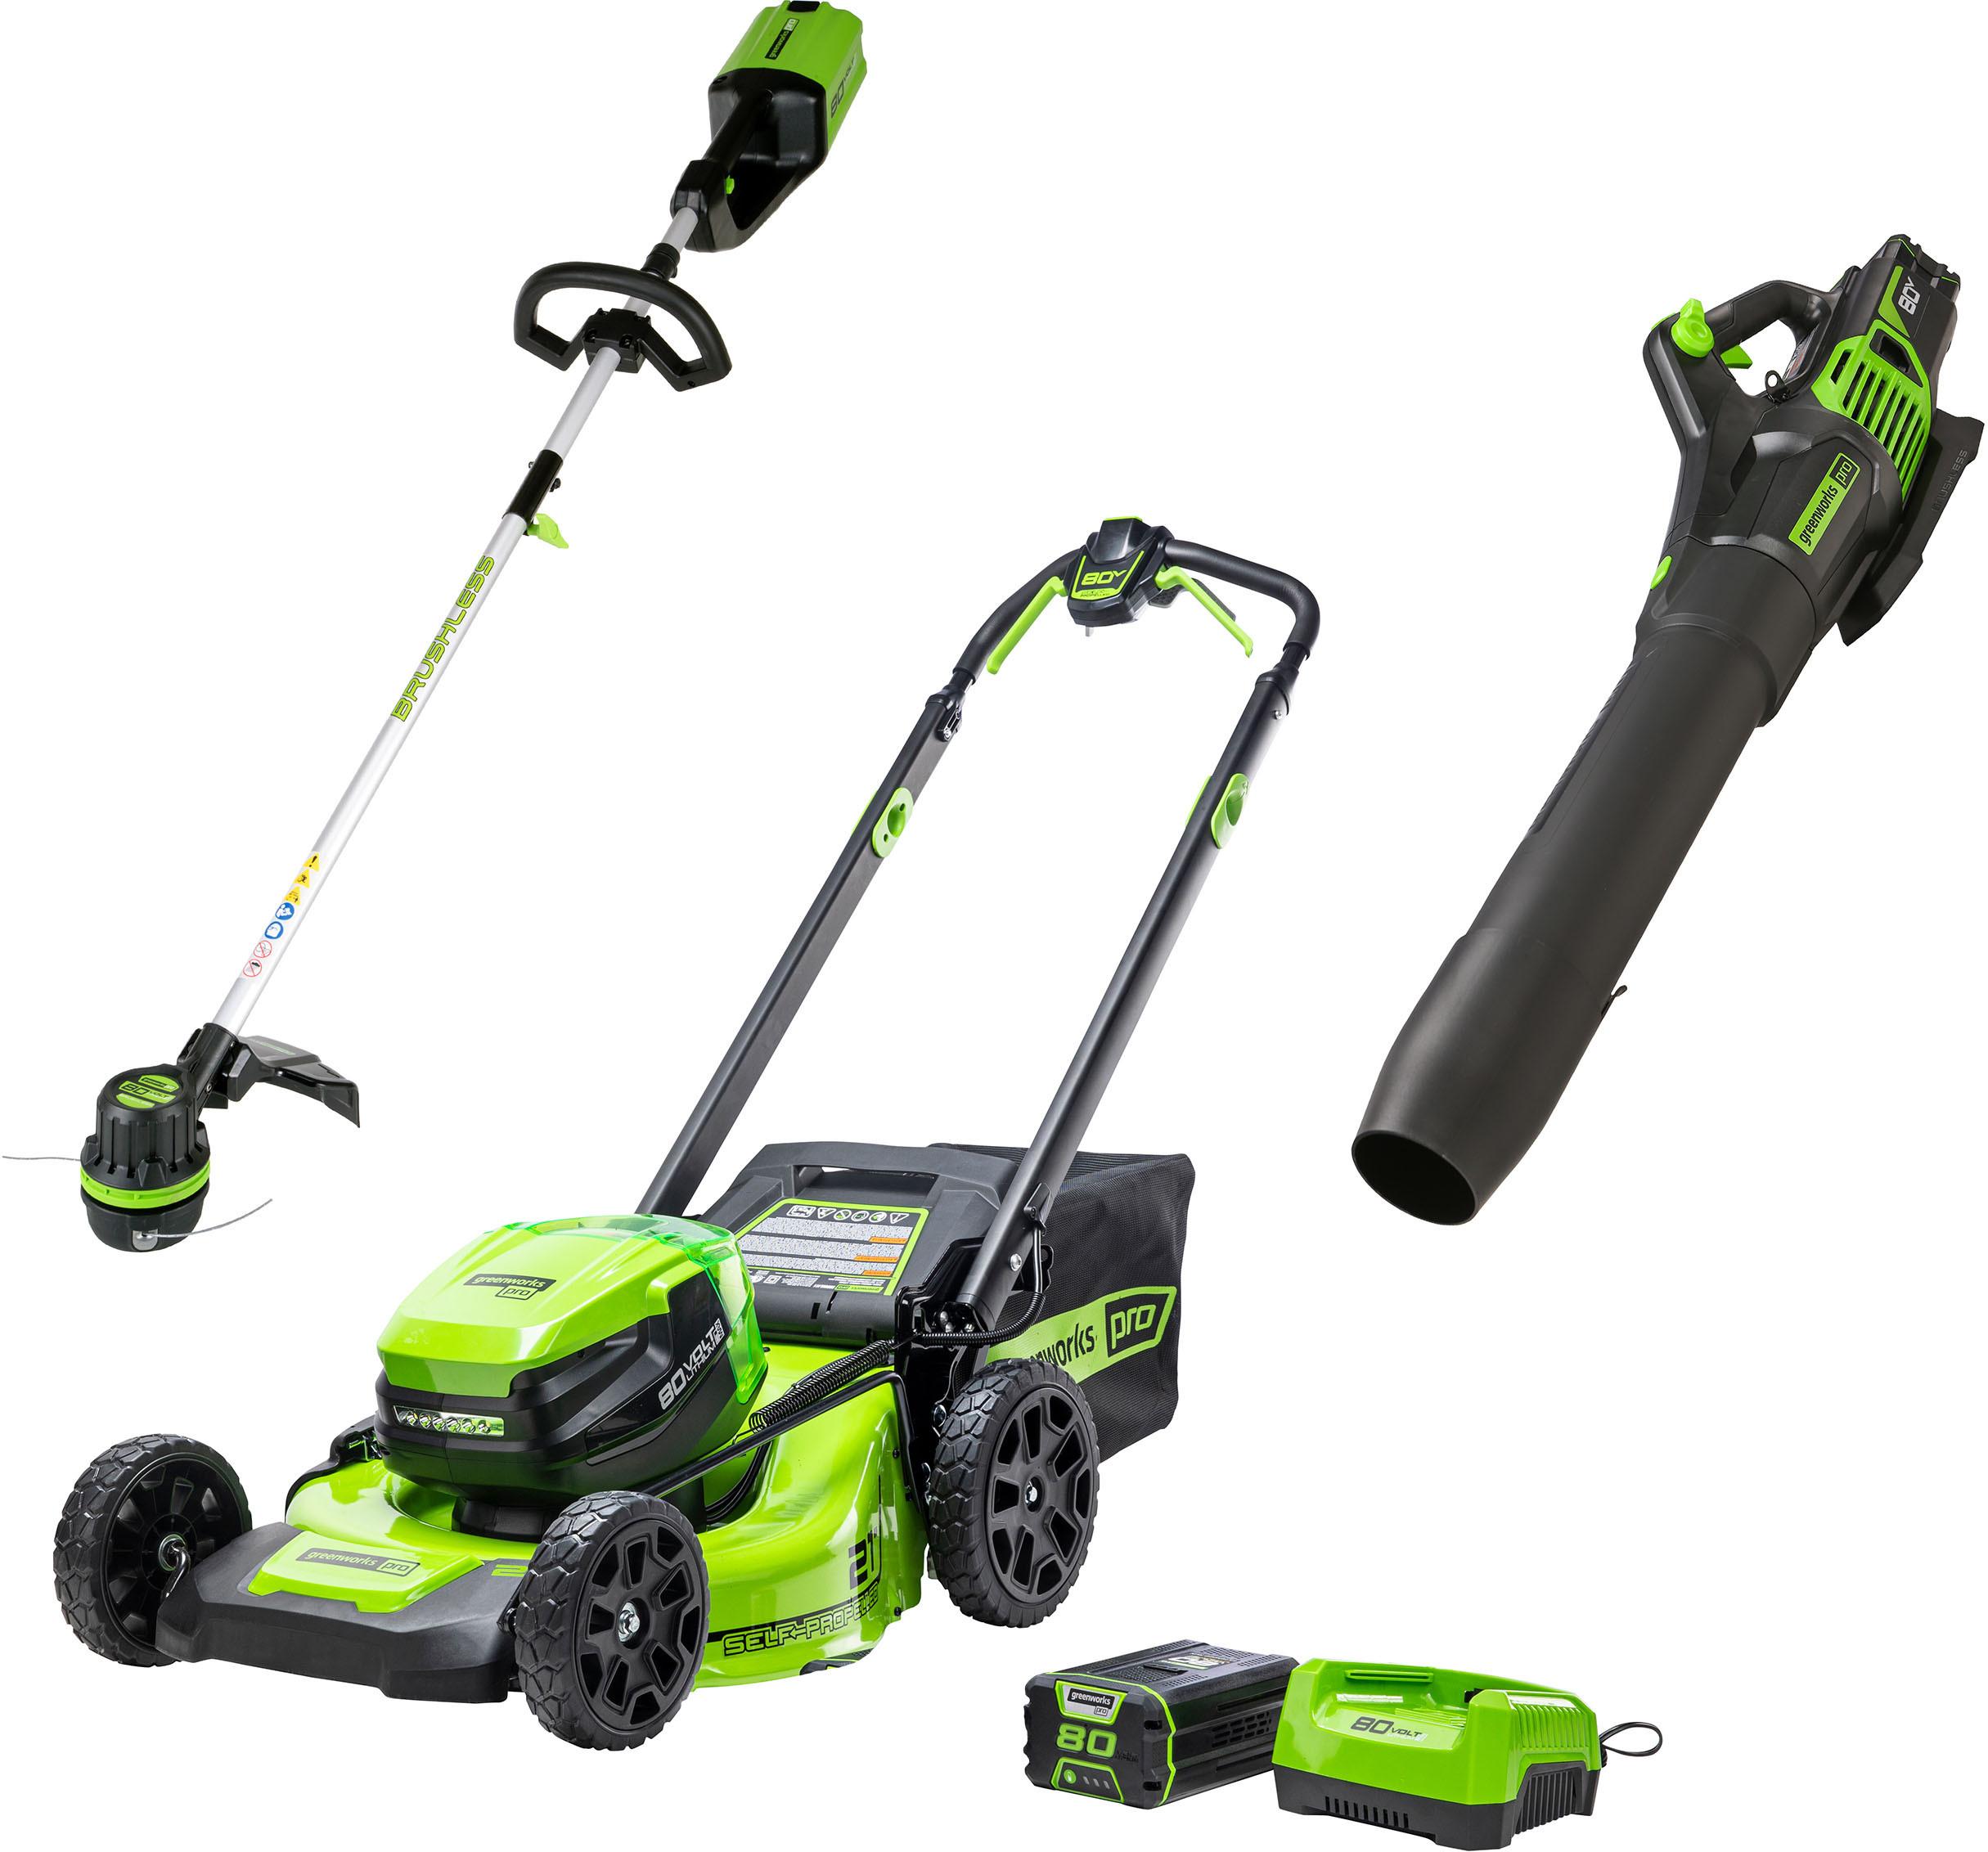 Rent to Own Greenworks 80V 21” Lawn Mower, 13” String Trimmer, and